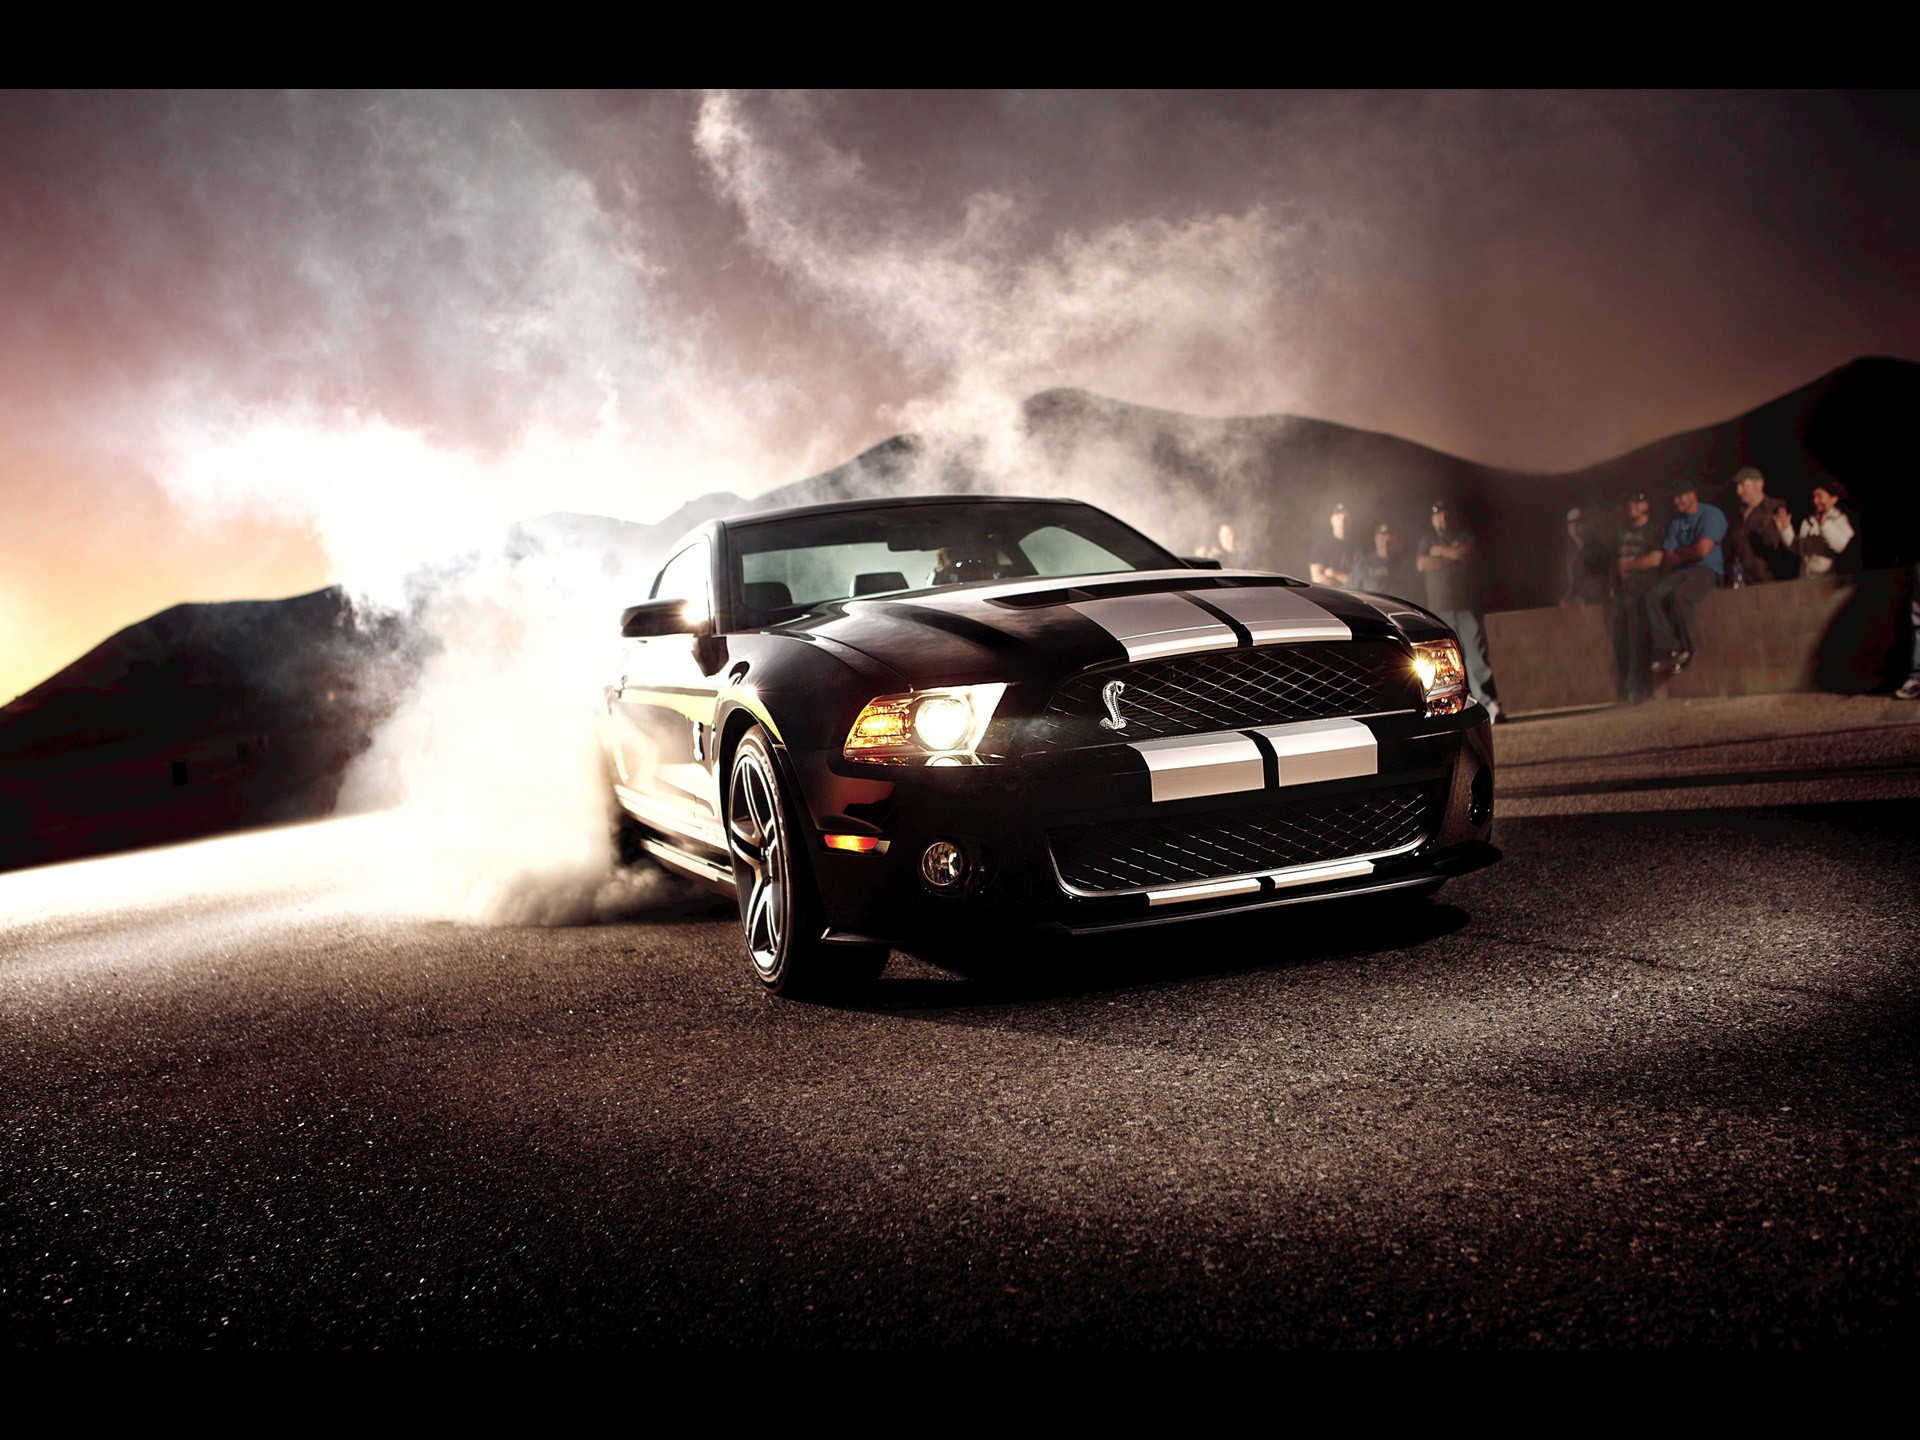 cars, smoke, vehicles, Ford Shelby, Ford Mustang Shelby GT500 - desktop wallpaper